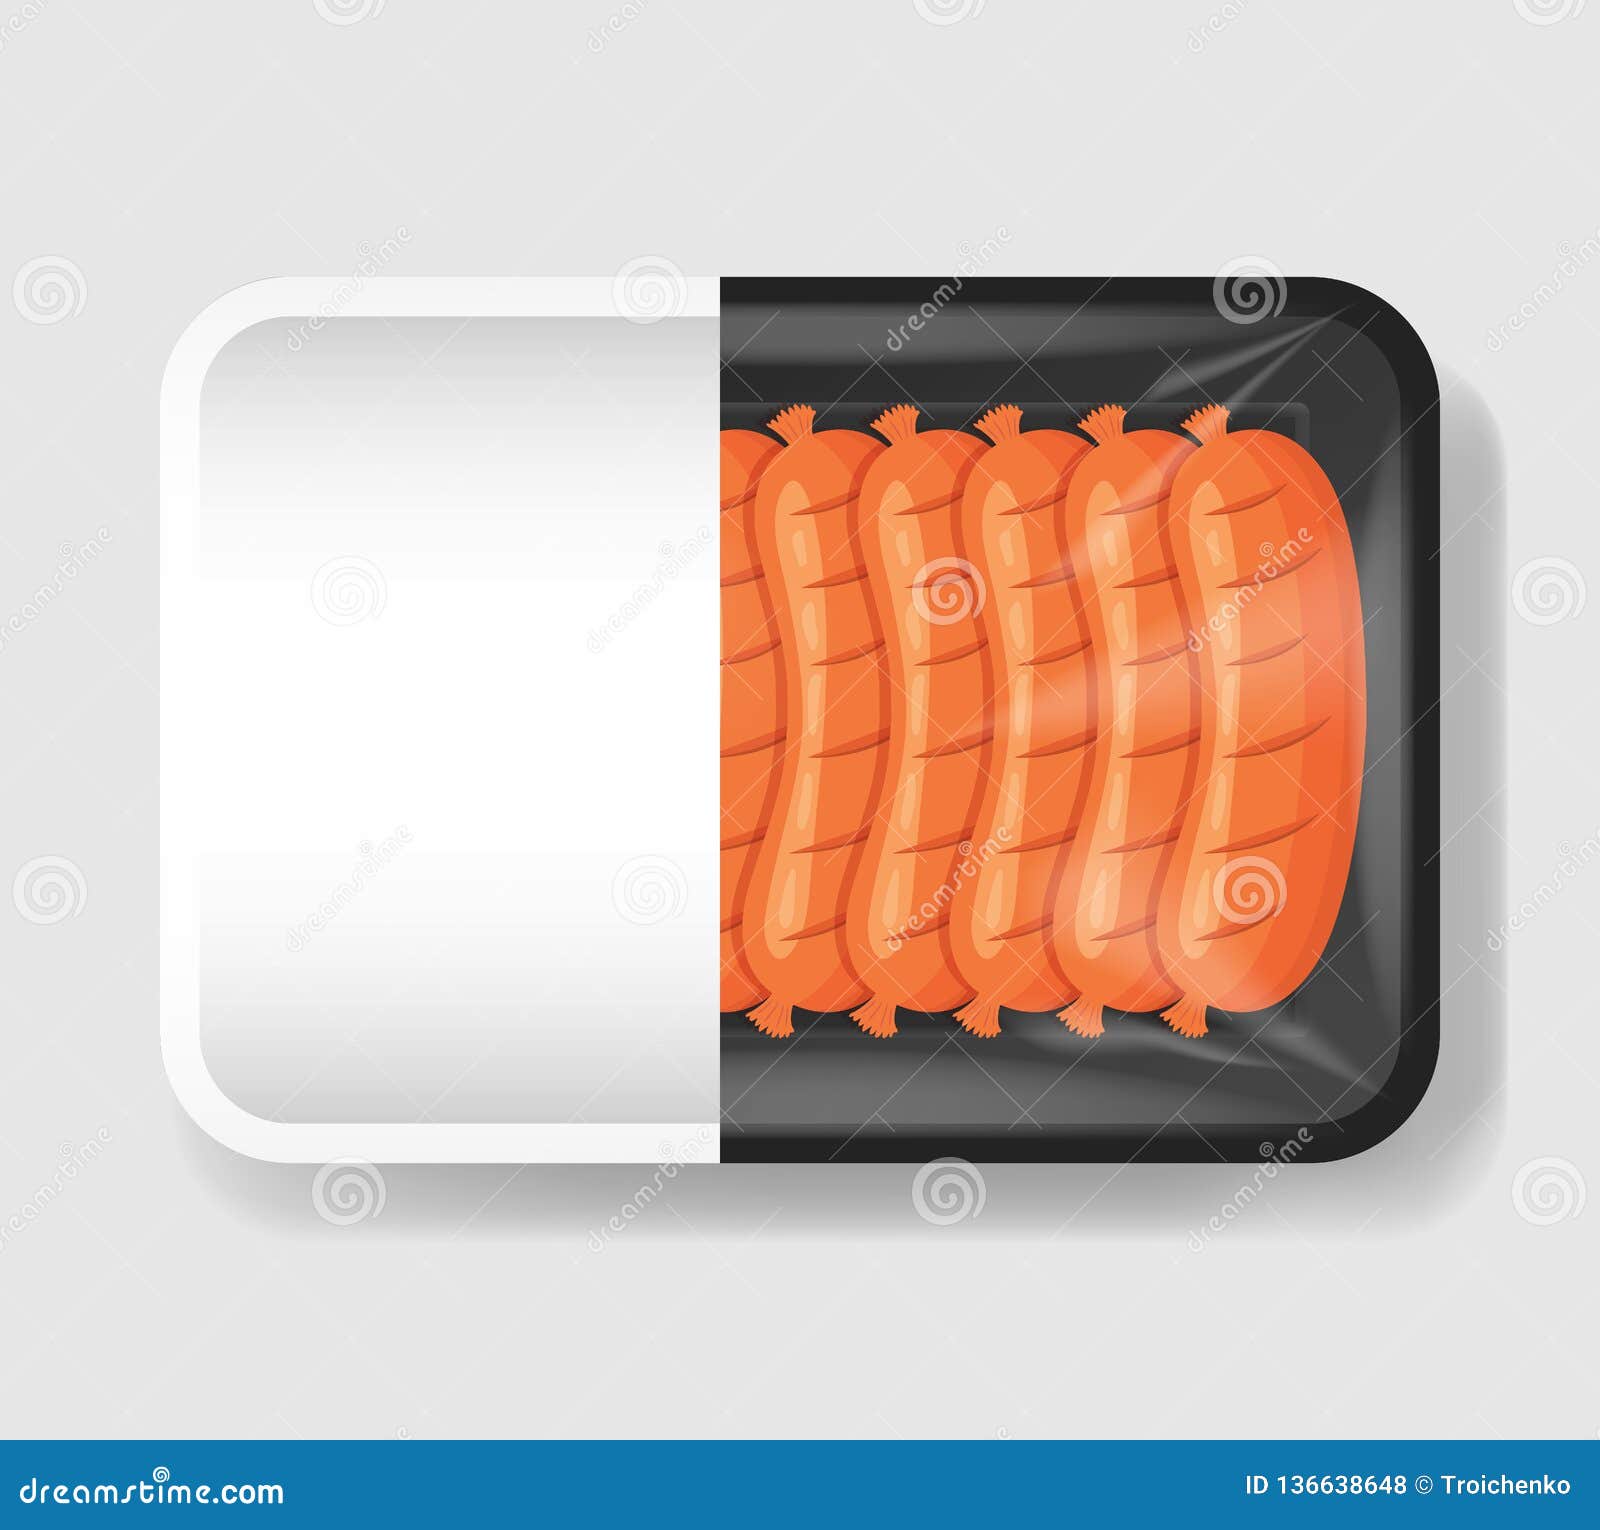 Download Sausages In Plastic Tray Container With Cellophane Cover Mockup Template For Your Design Plastic Food Container With Stock Vector Illustration Of Meal Market 136638648